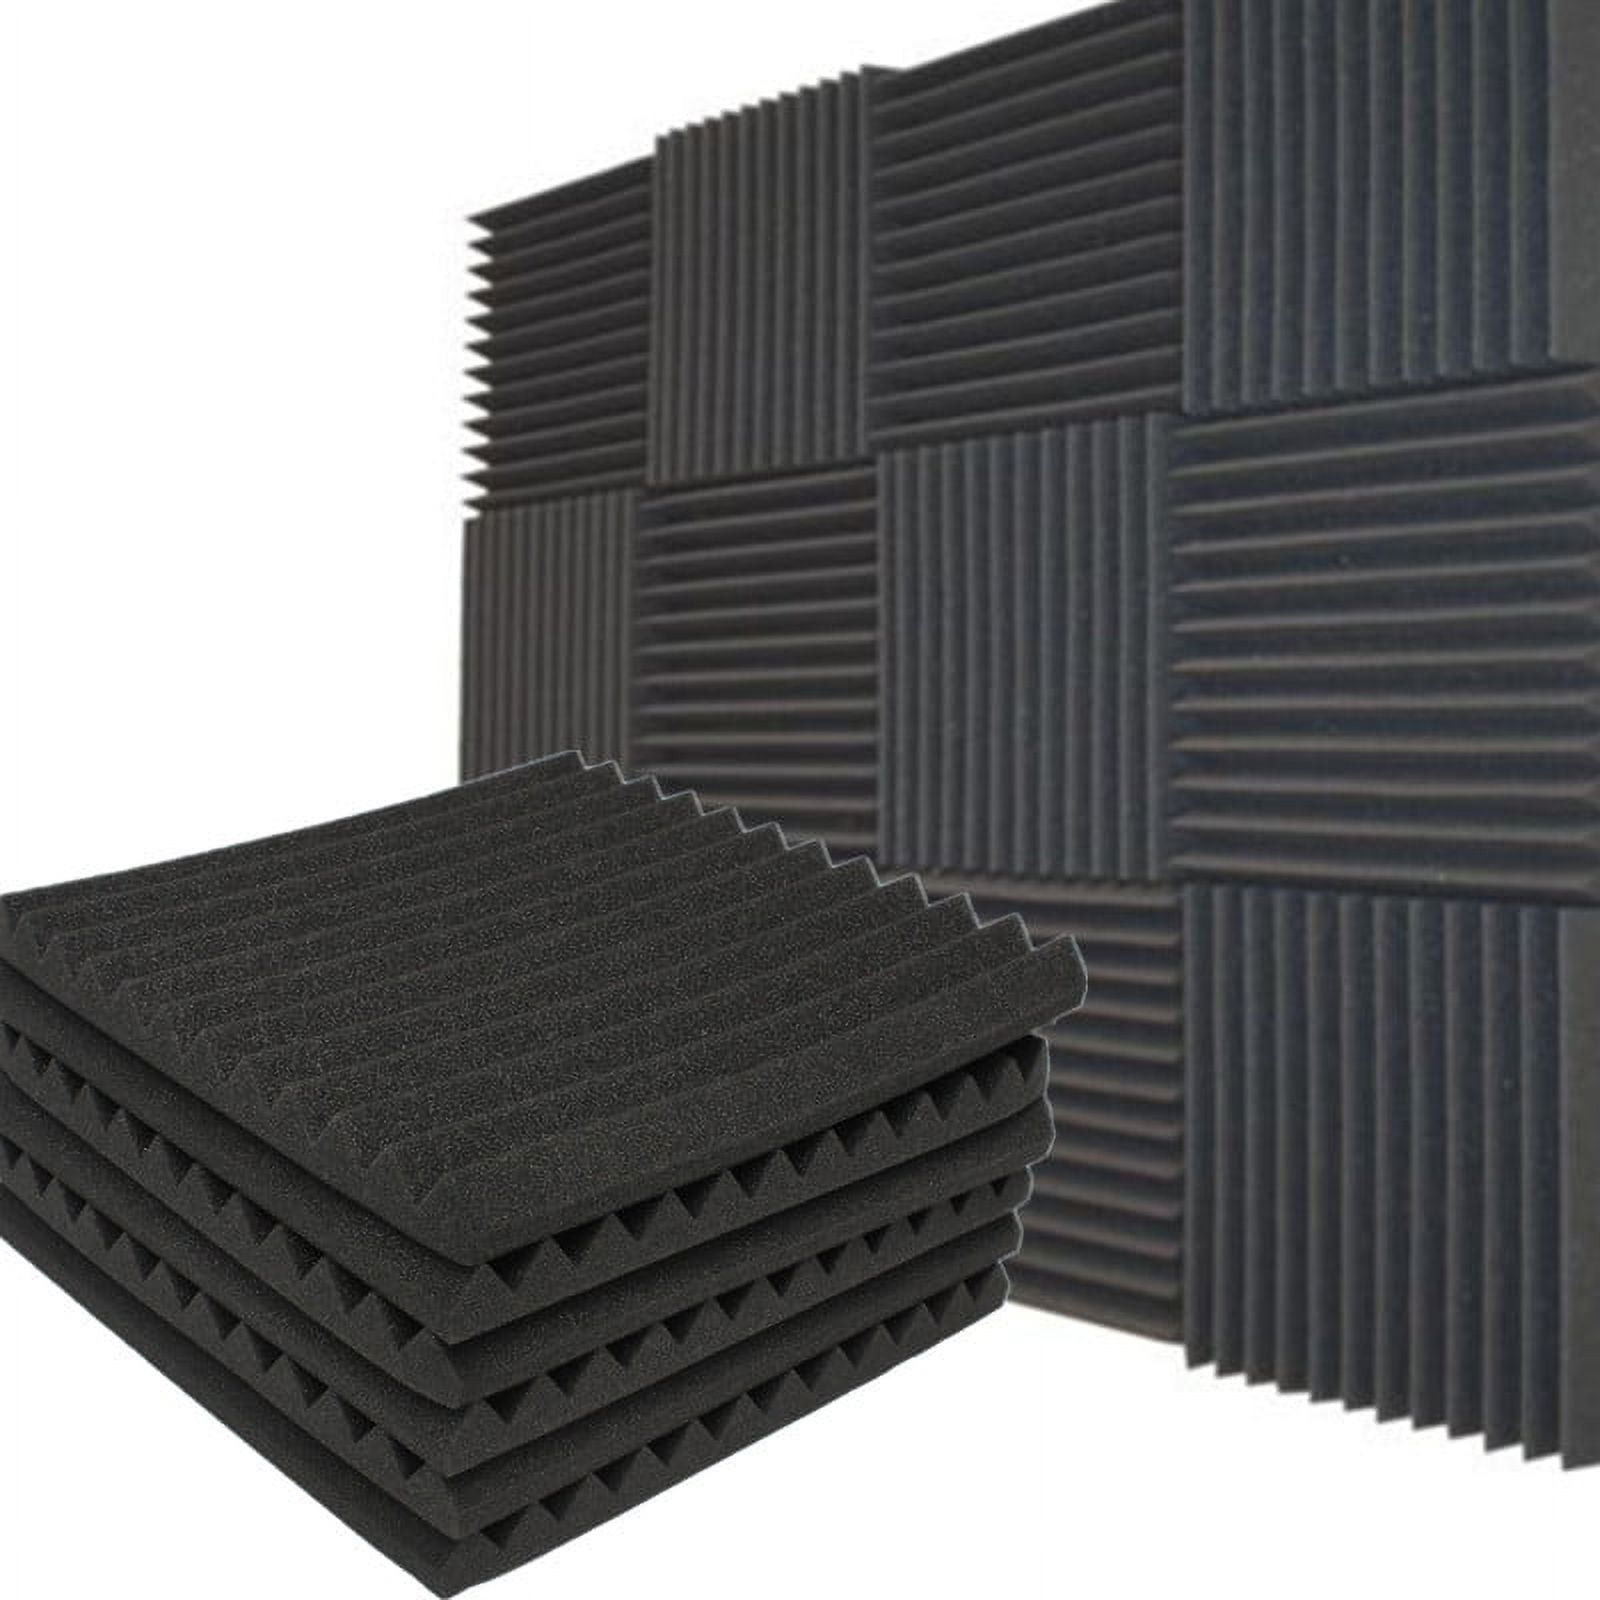  Acoustic Panels Sound Absorbing 12 Pack, 12x12x2 Sound Proof  Foam Panels for Home Studio, Sound Dampening Panels, Acoustic Foam Panels  for Recording Studio Acoustical Treatments : Musical Instruments